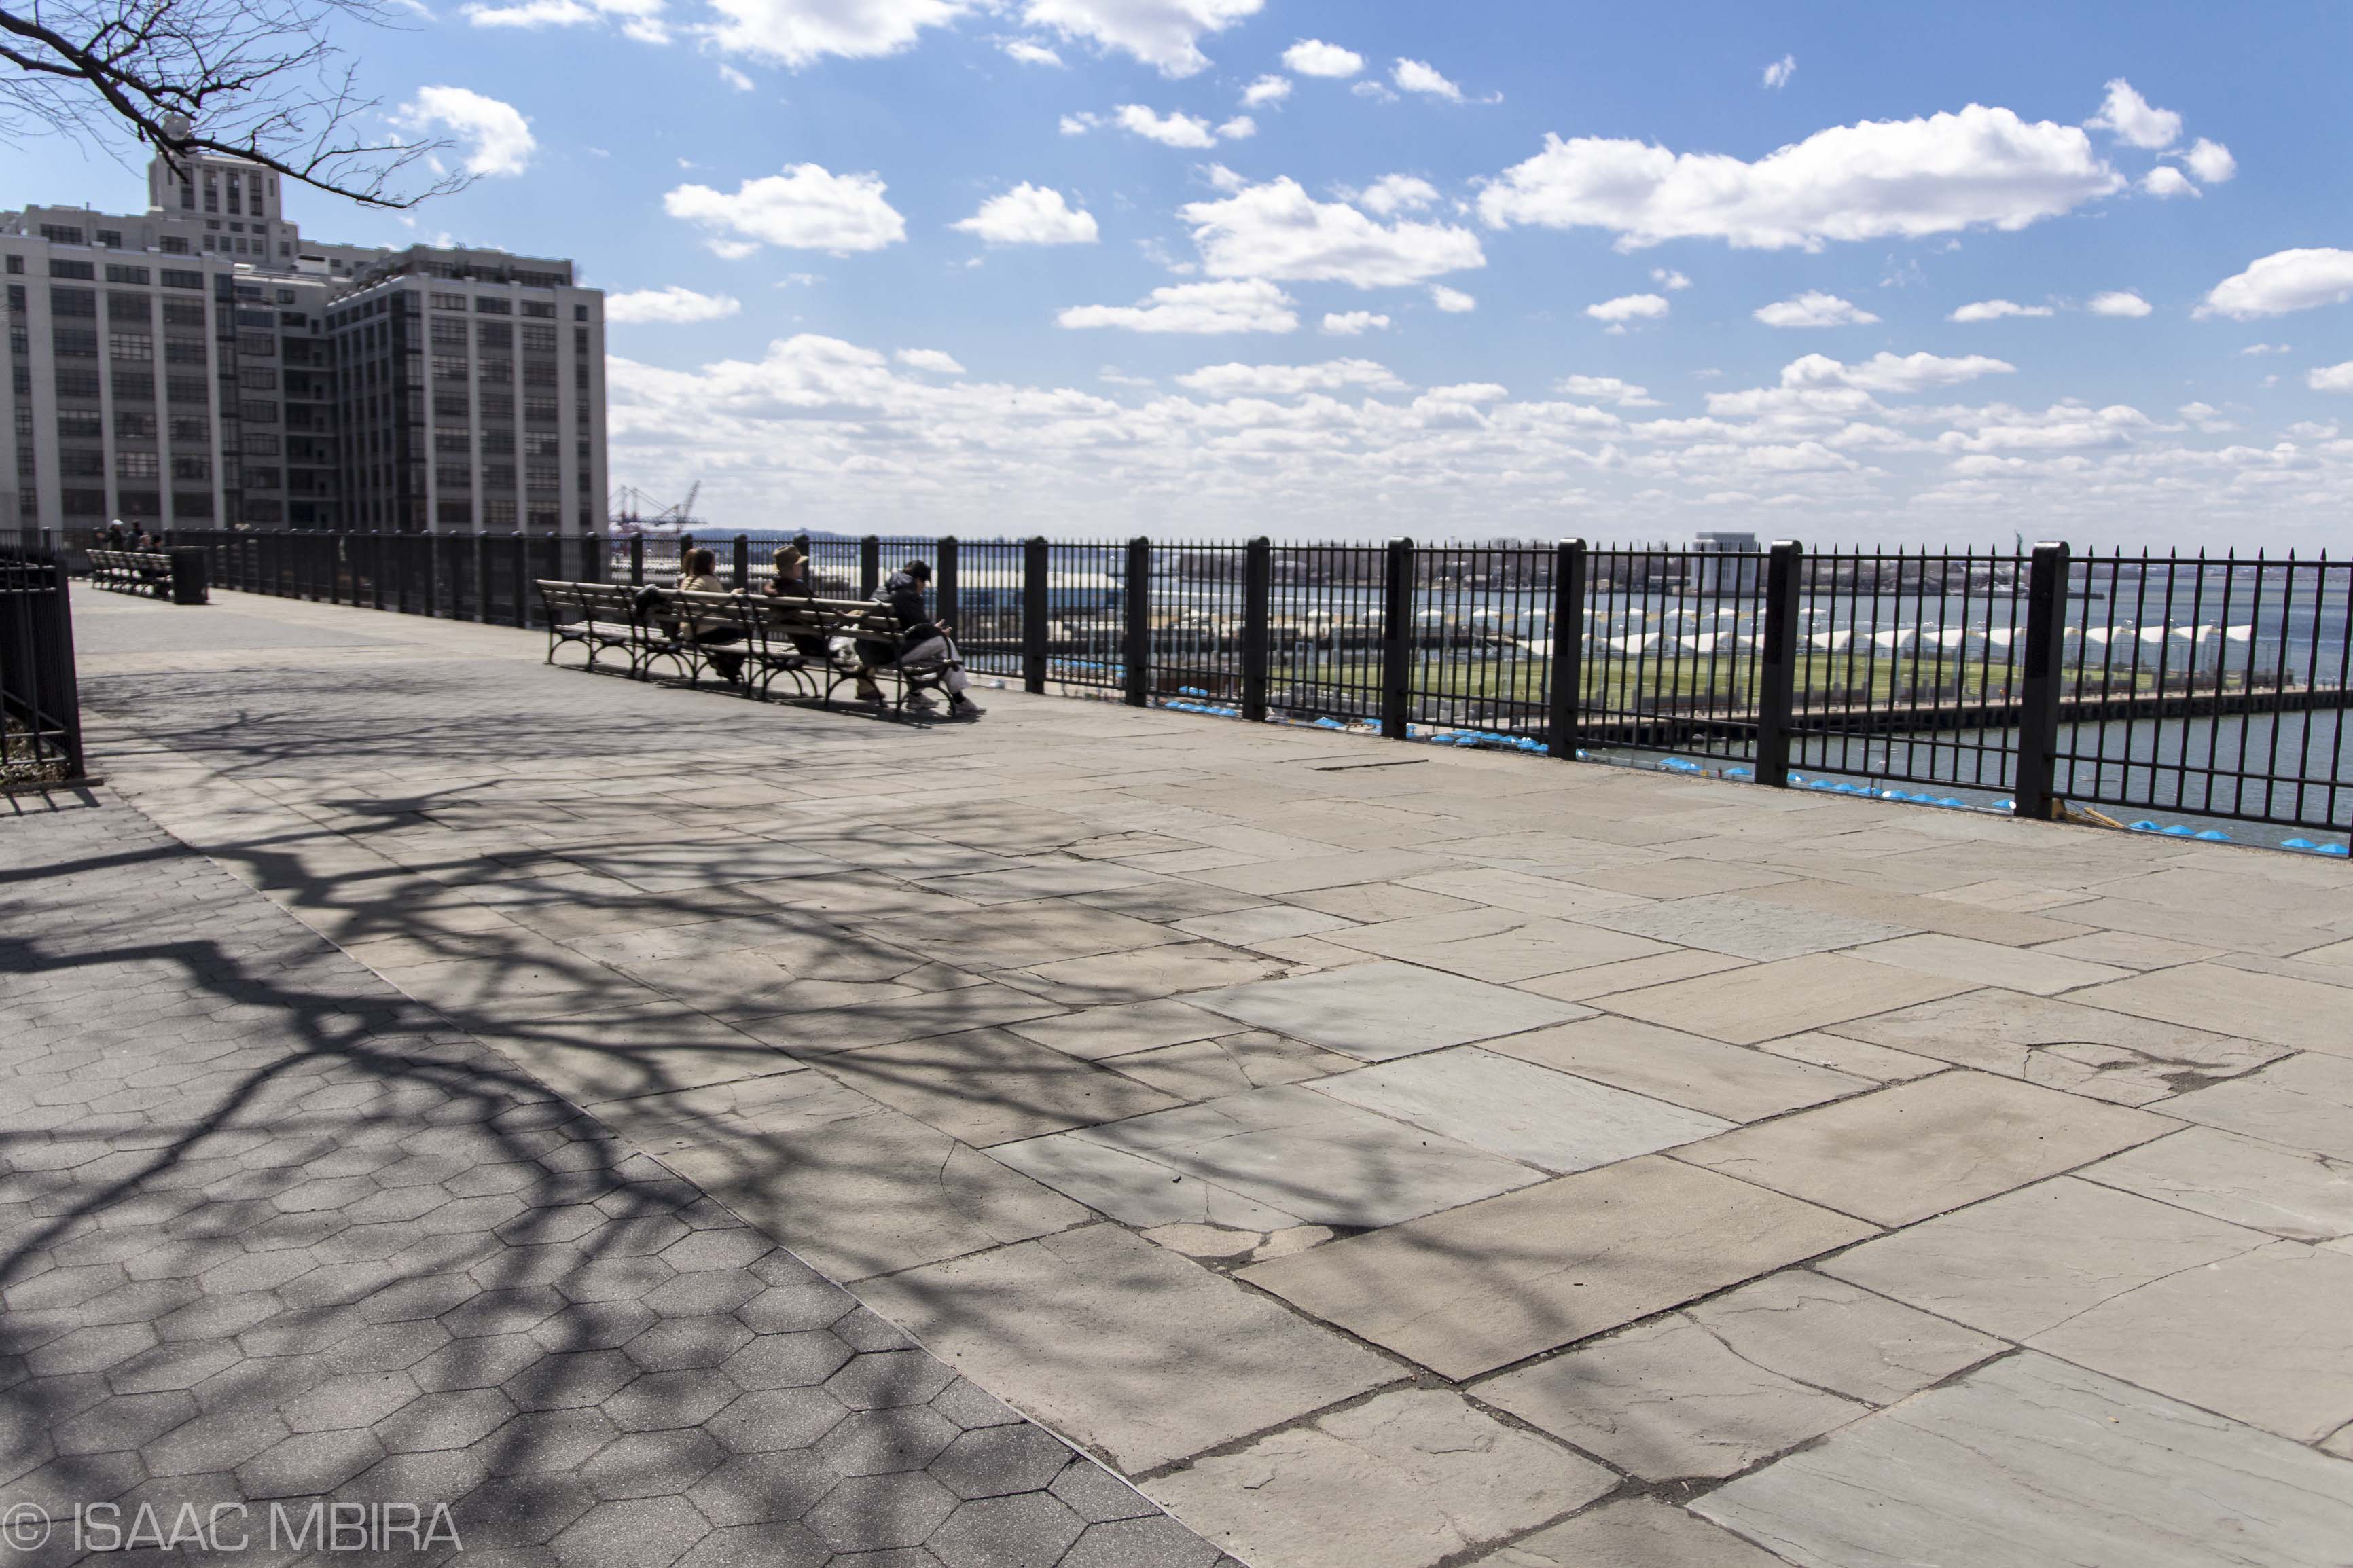 Image of the Brooklyn Heights Promenade